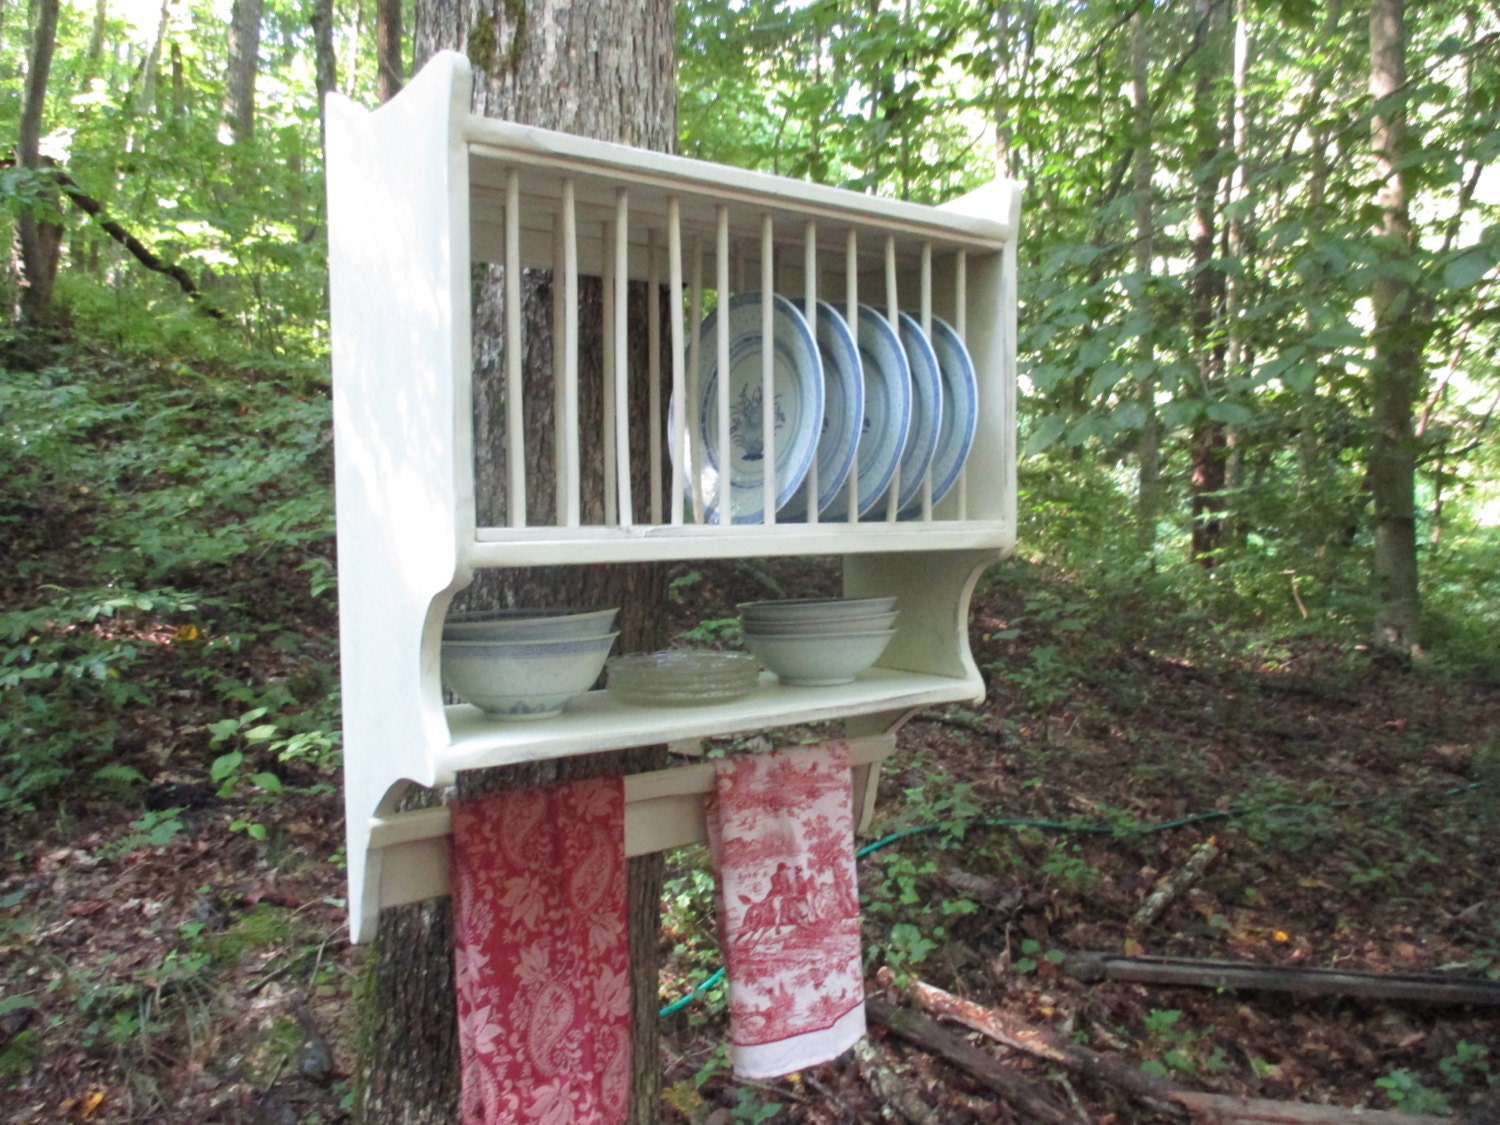 Farmhouse Plate Rack with Primitive Towel Rung Hanging Plate